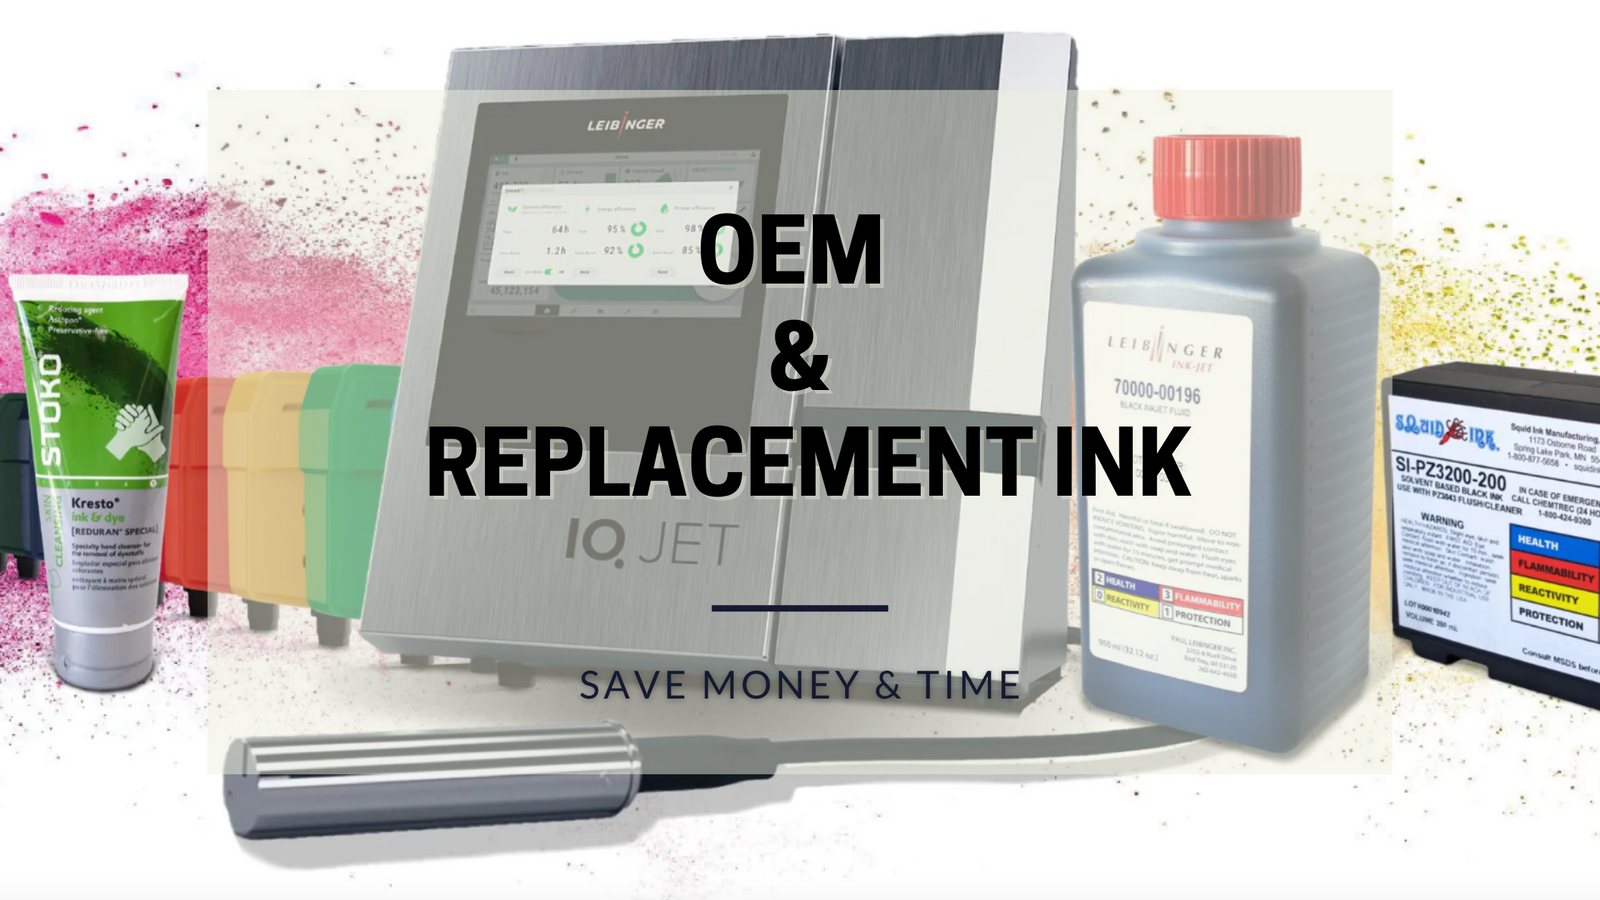 Beyond OEMs: Explore Alternative Ink Suppliers for Cost-Effective Printing